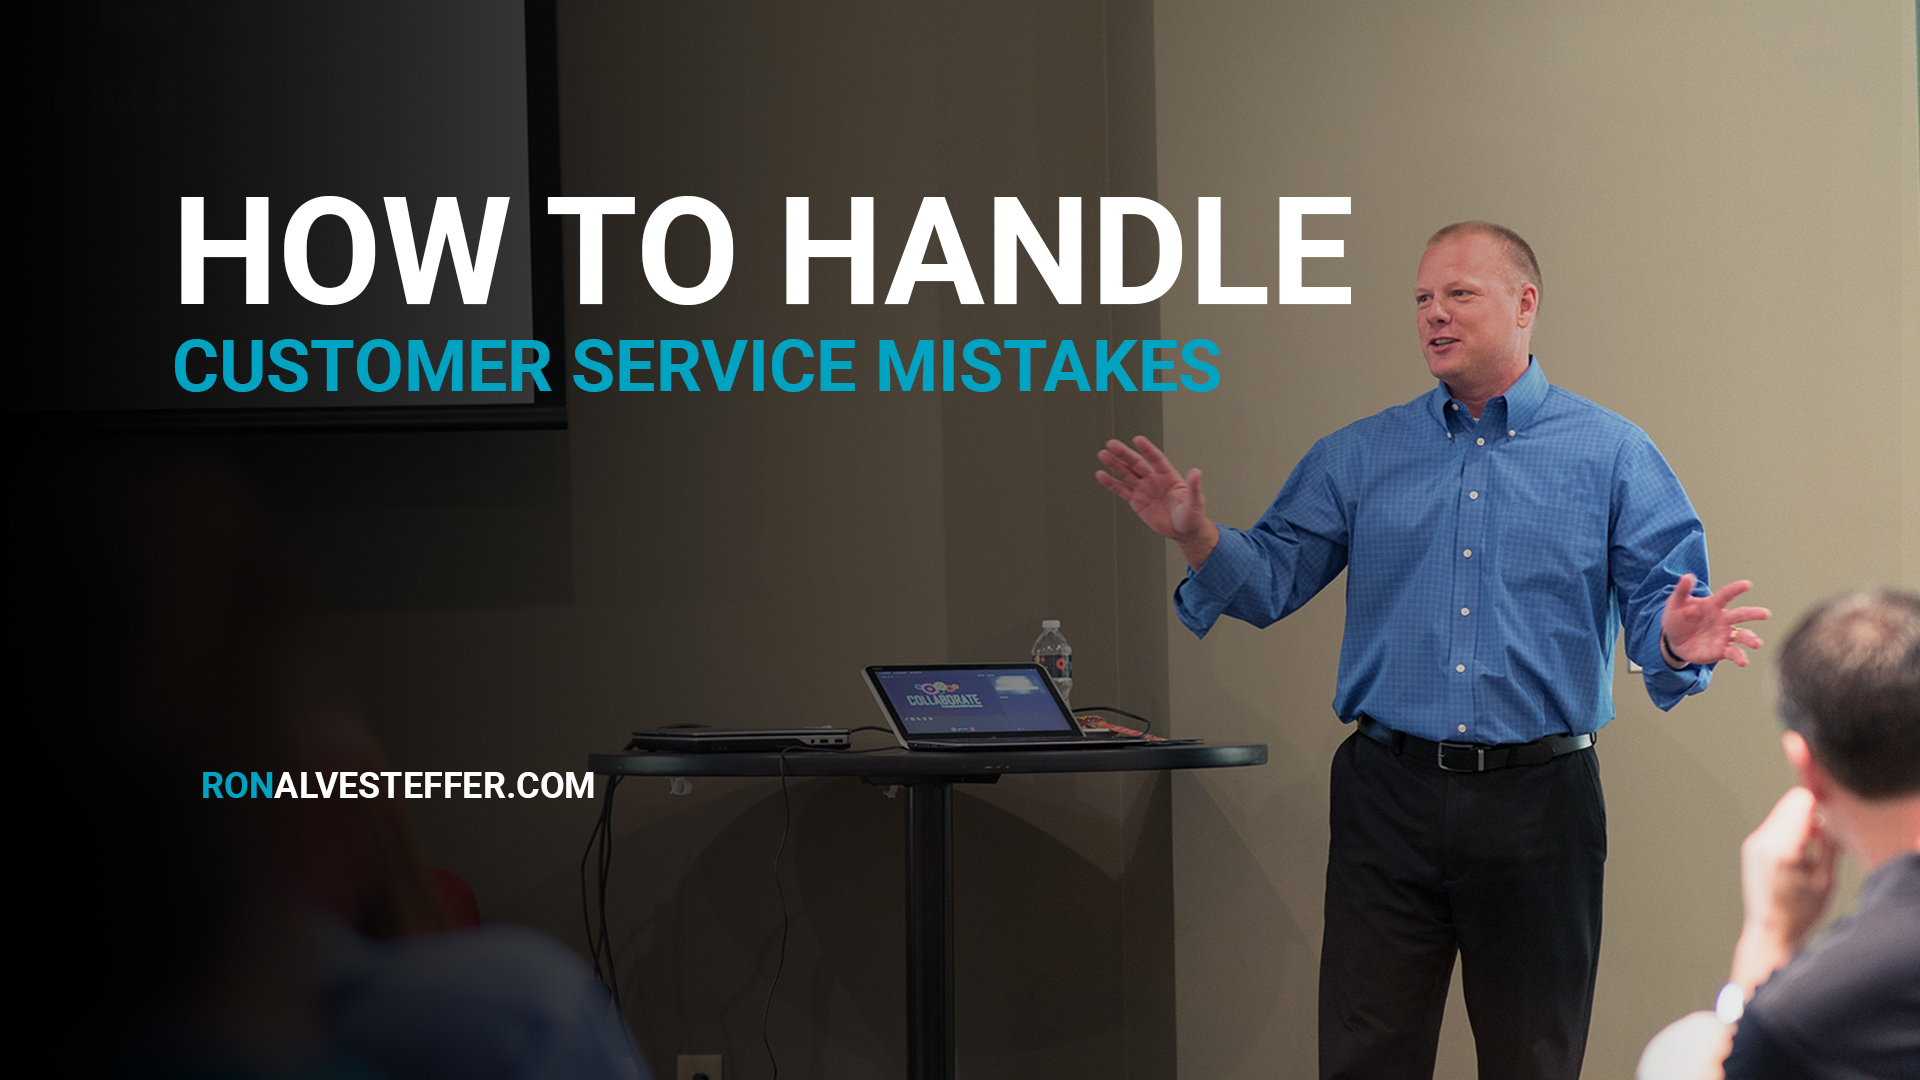 How to Handle Customer Service Mistakes